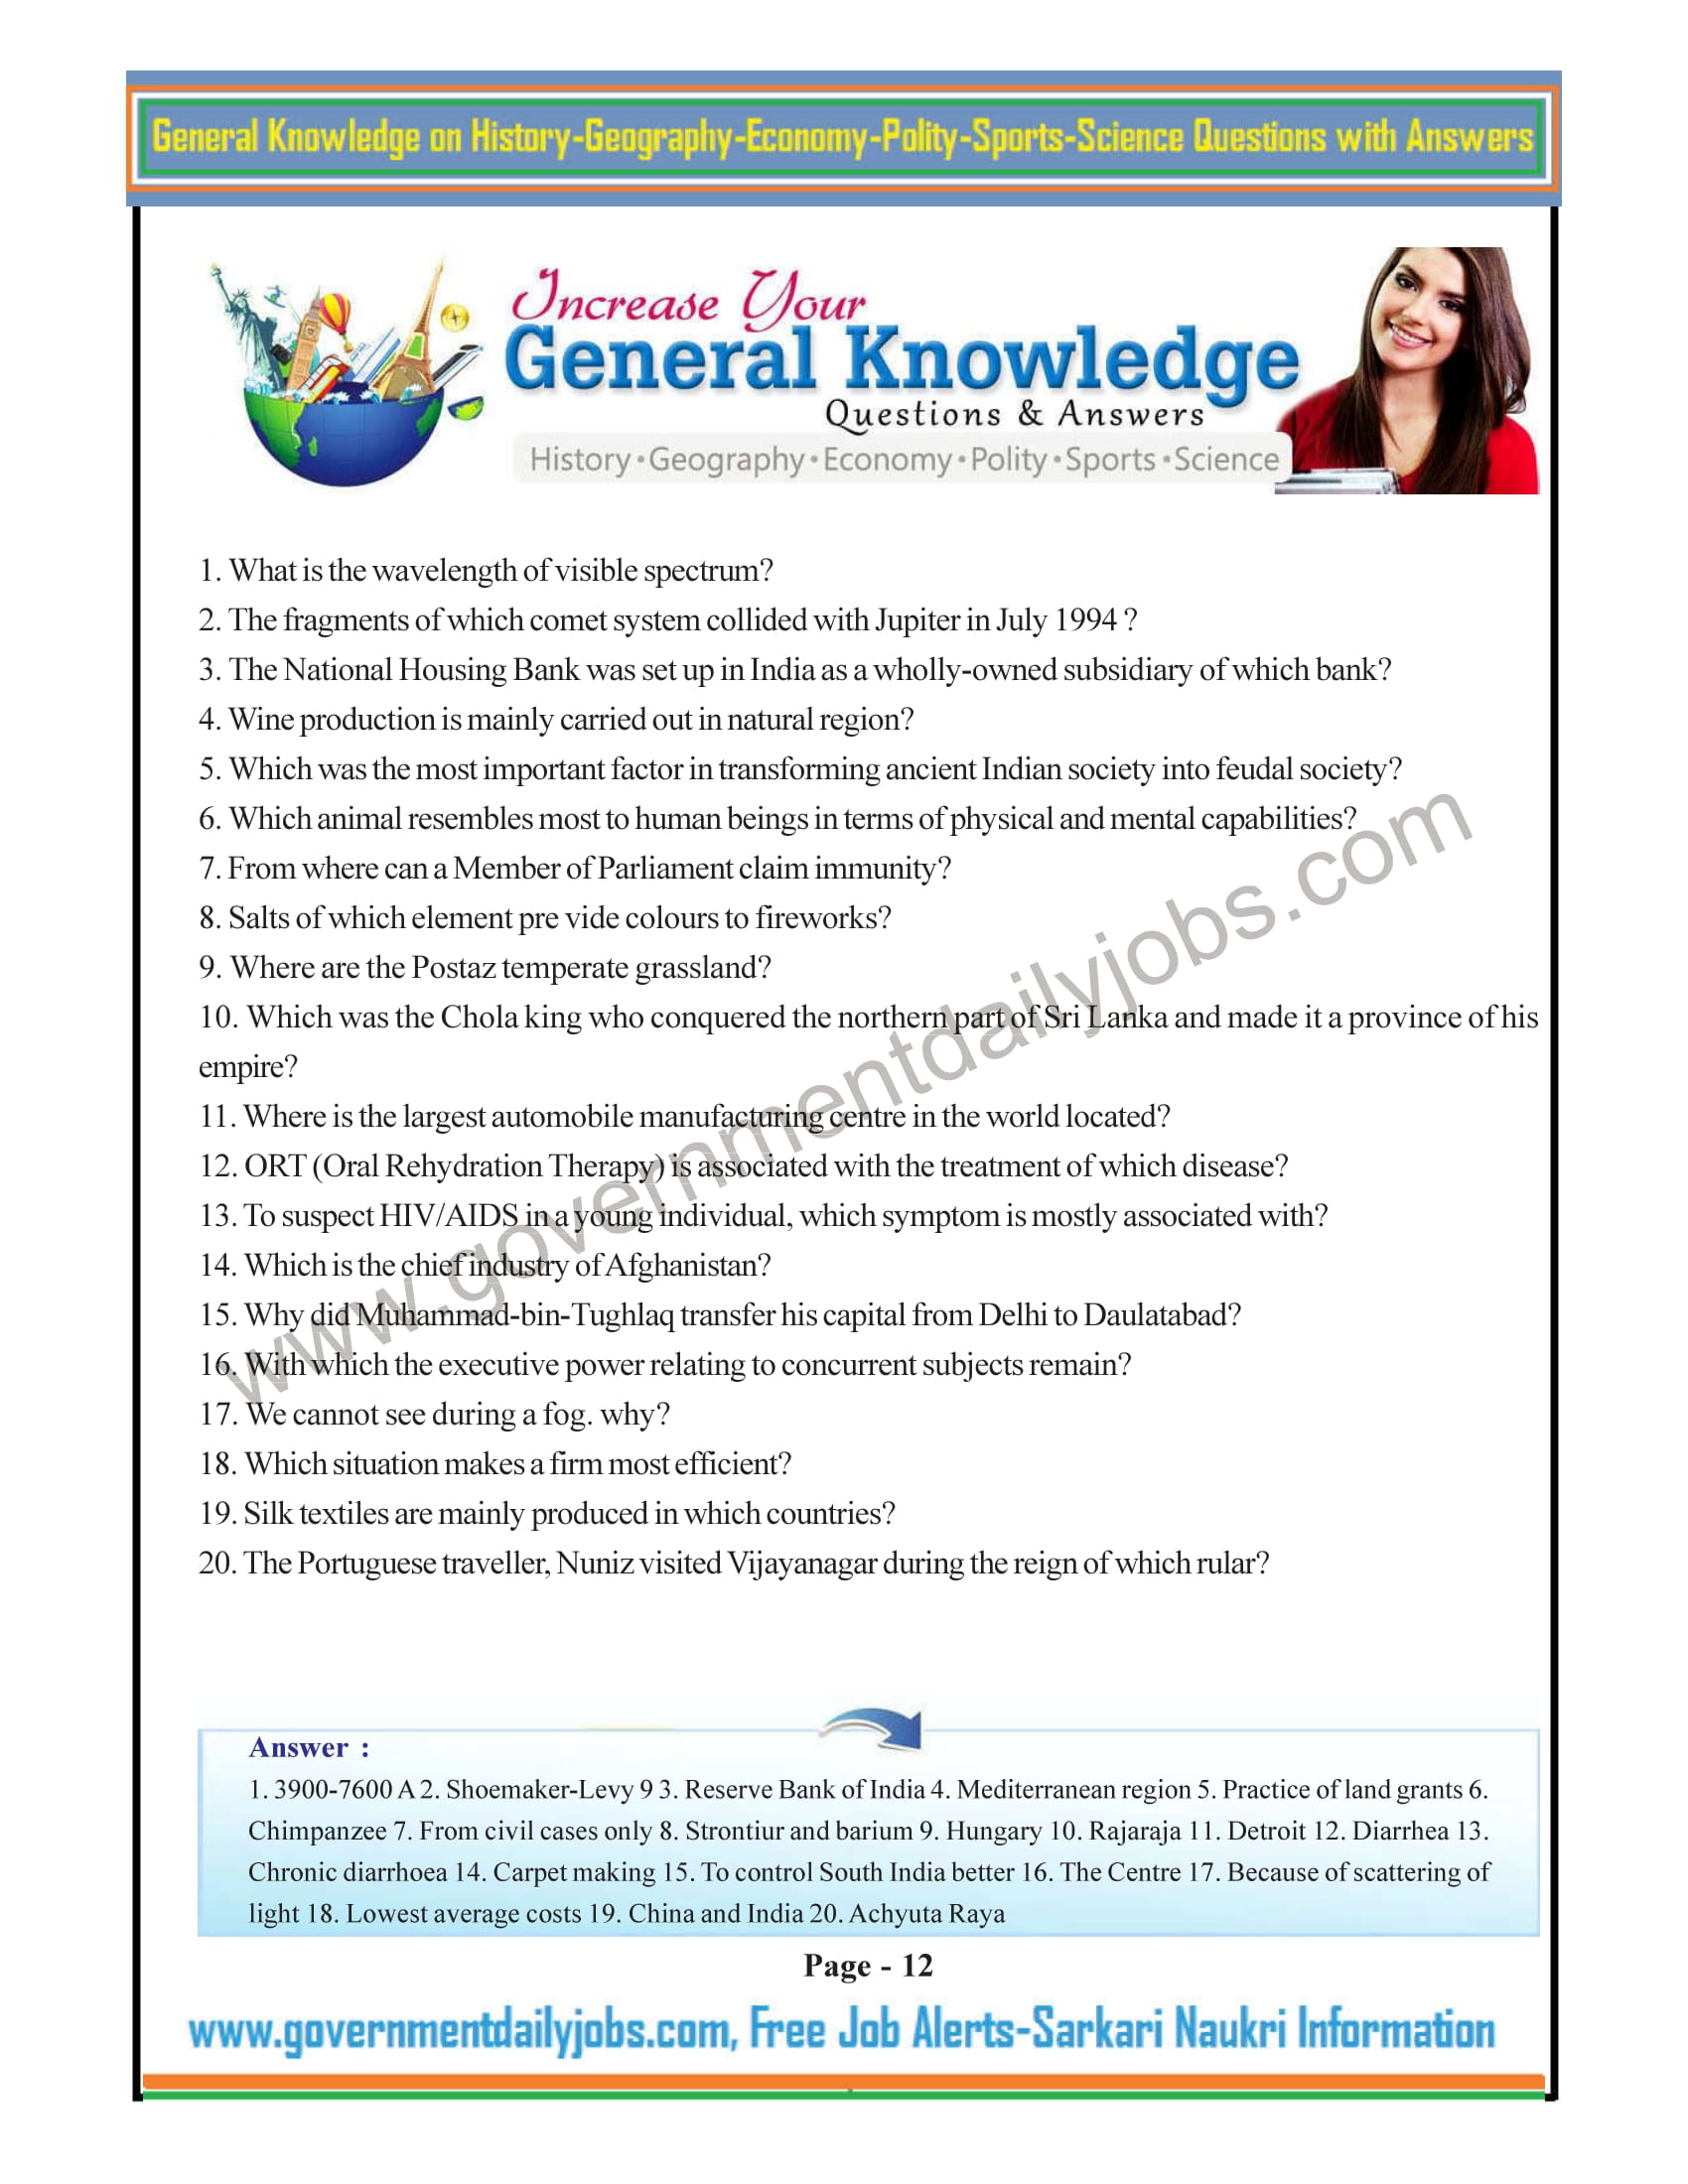 General Questions and Answers in English